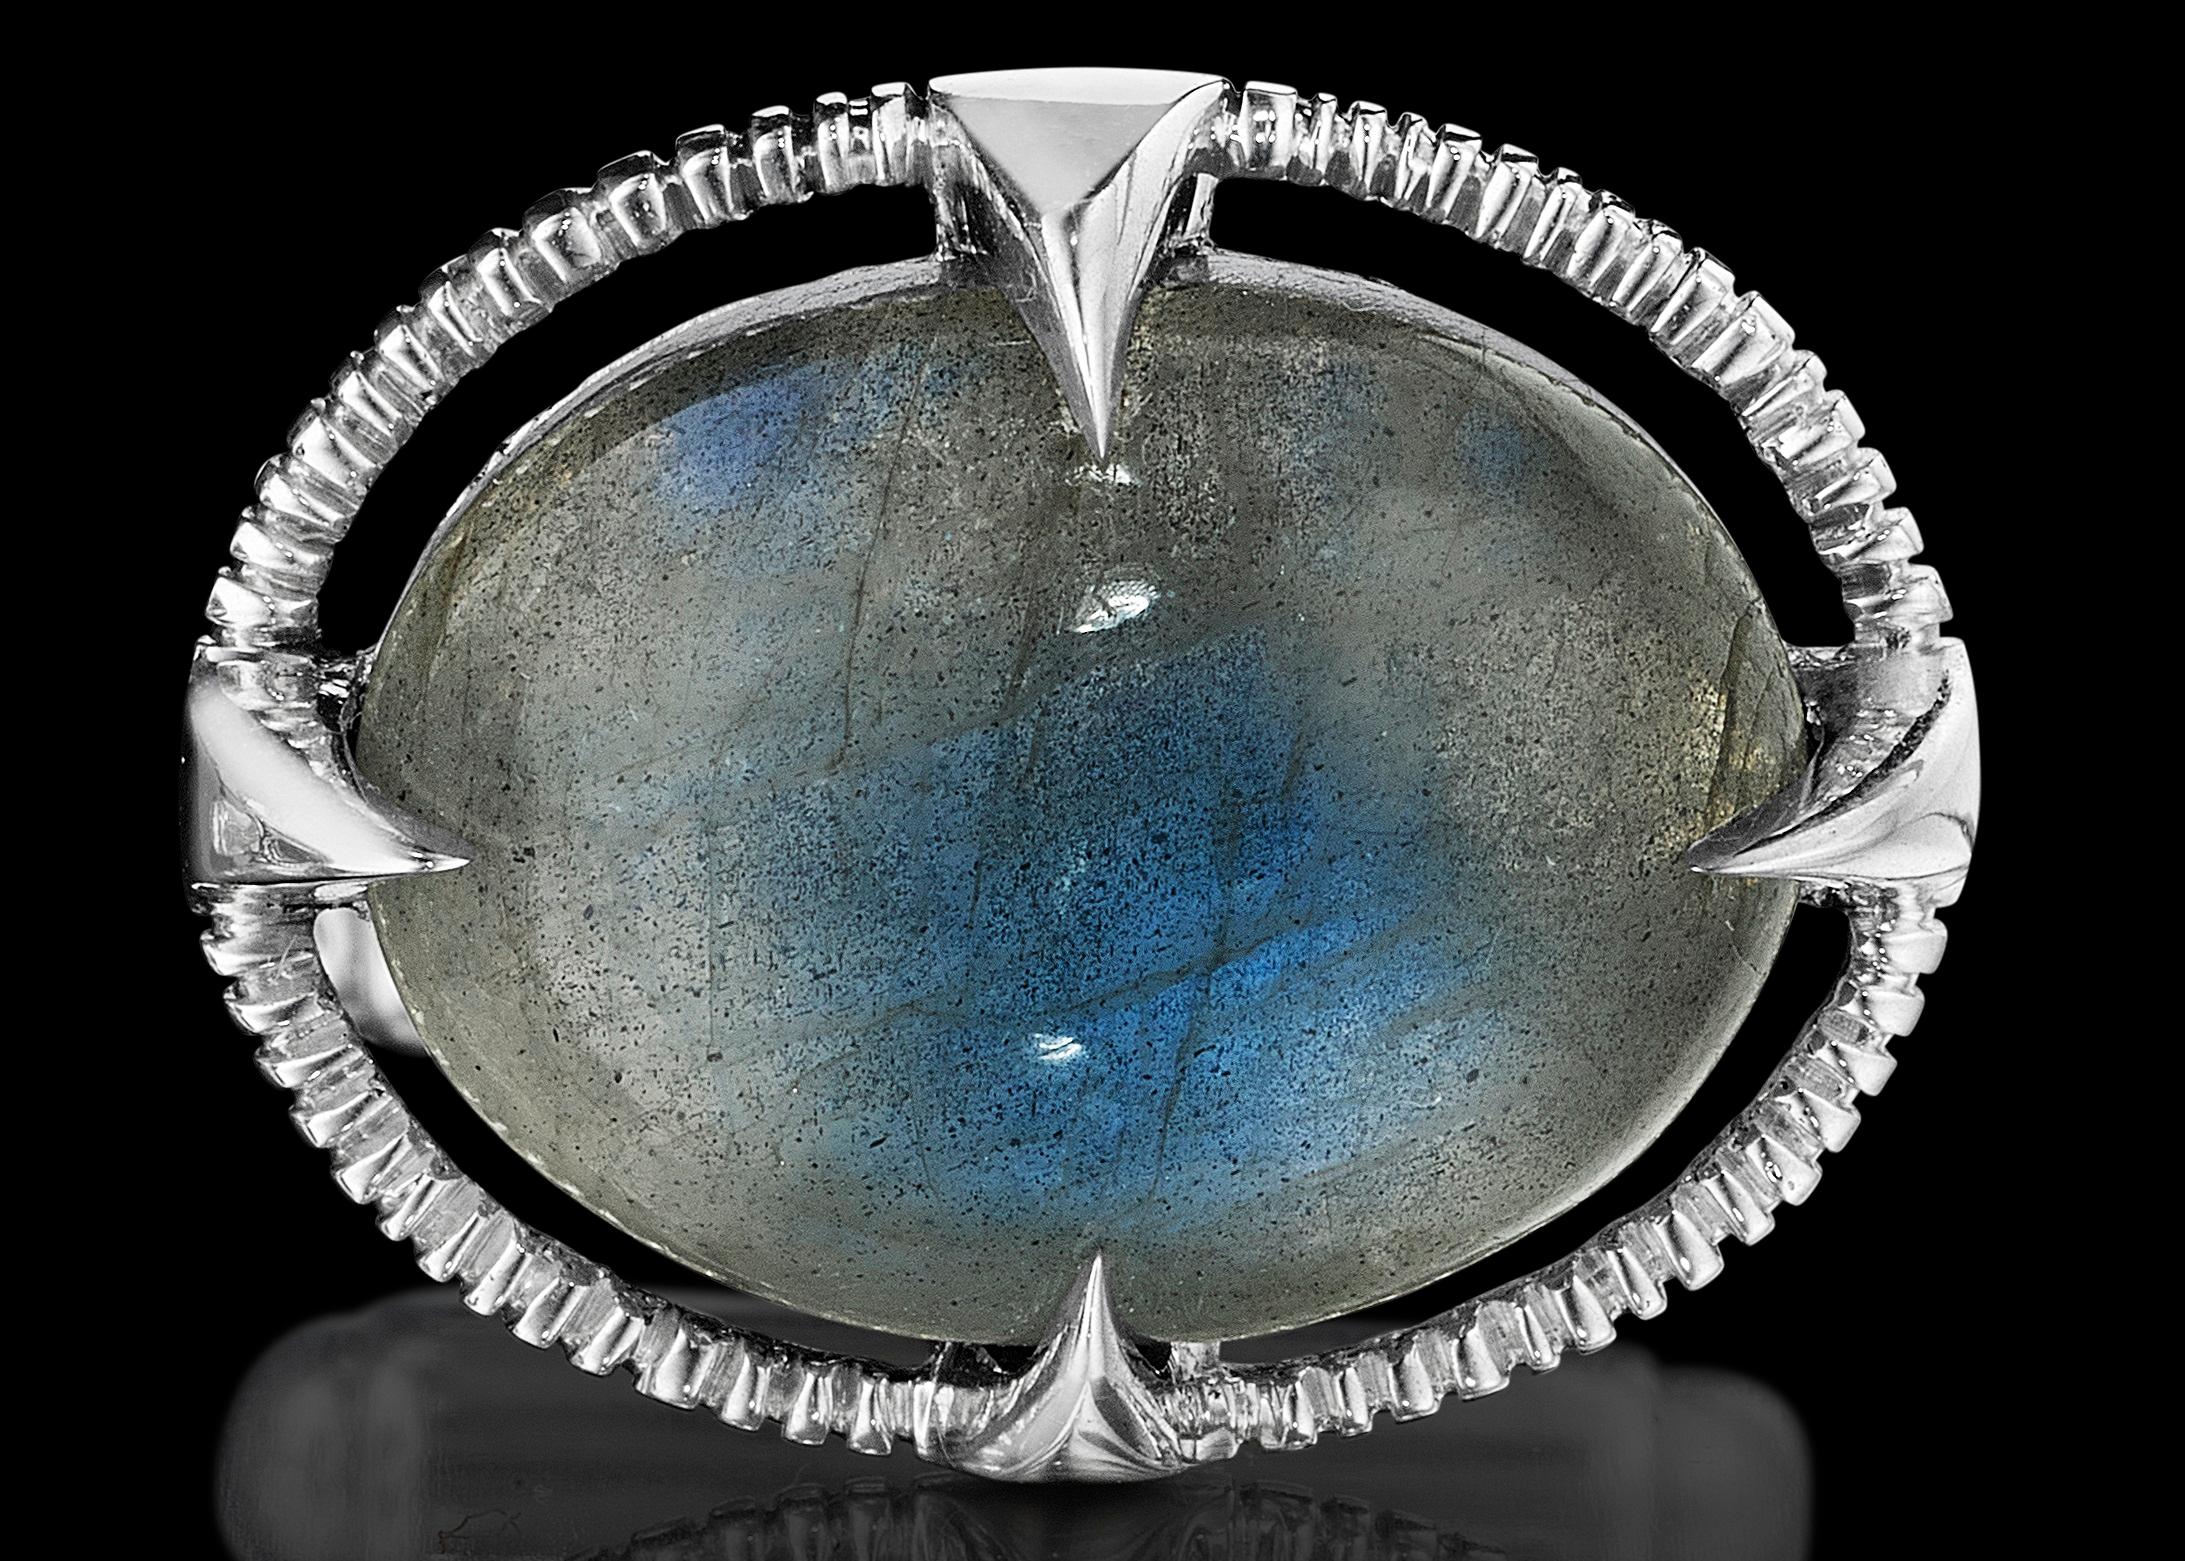 Yoki Sophisticated Labradorite Sterling Silver Cufflinks In New Condition For Sale In Annandale, VA